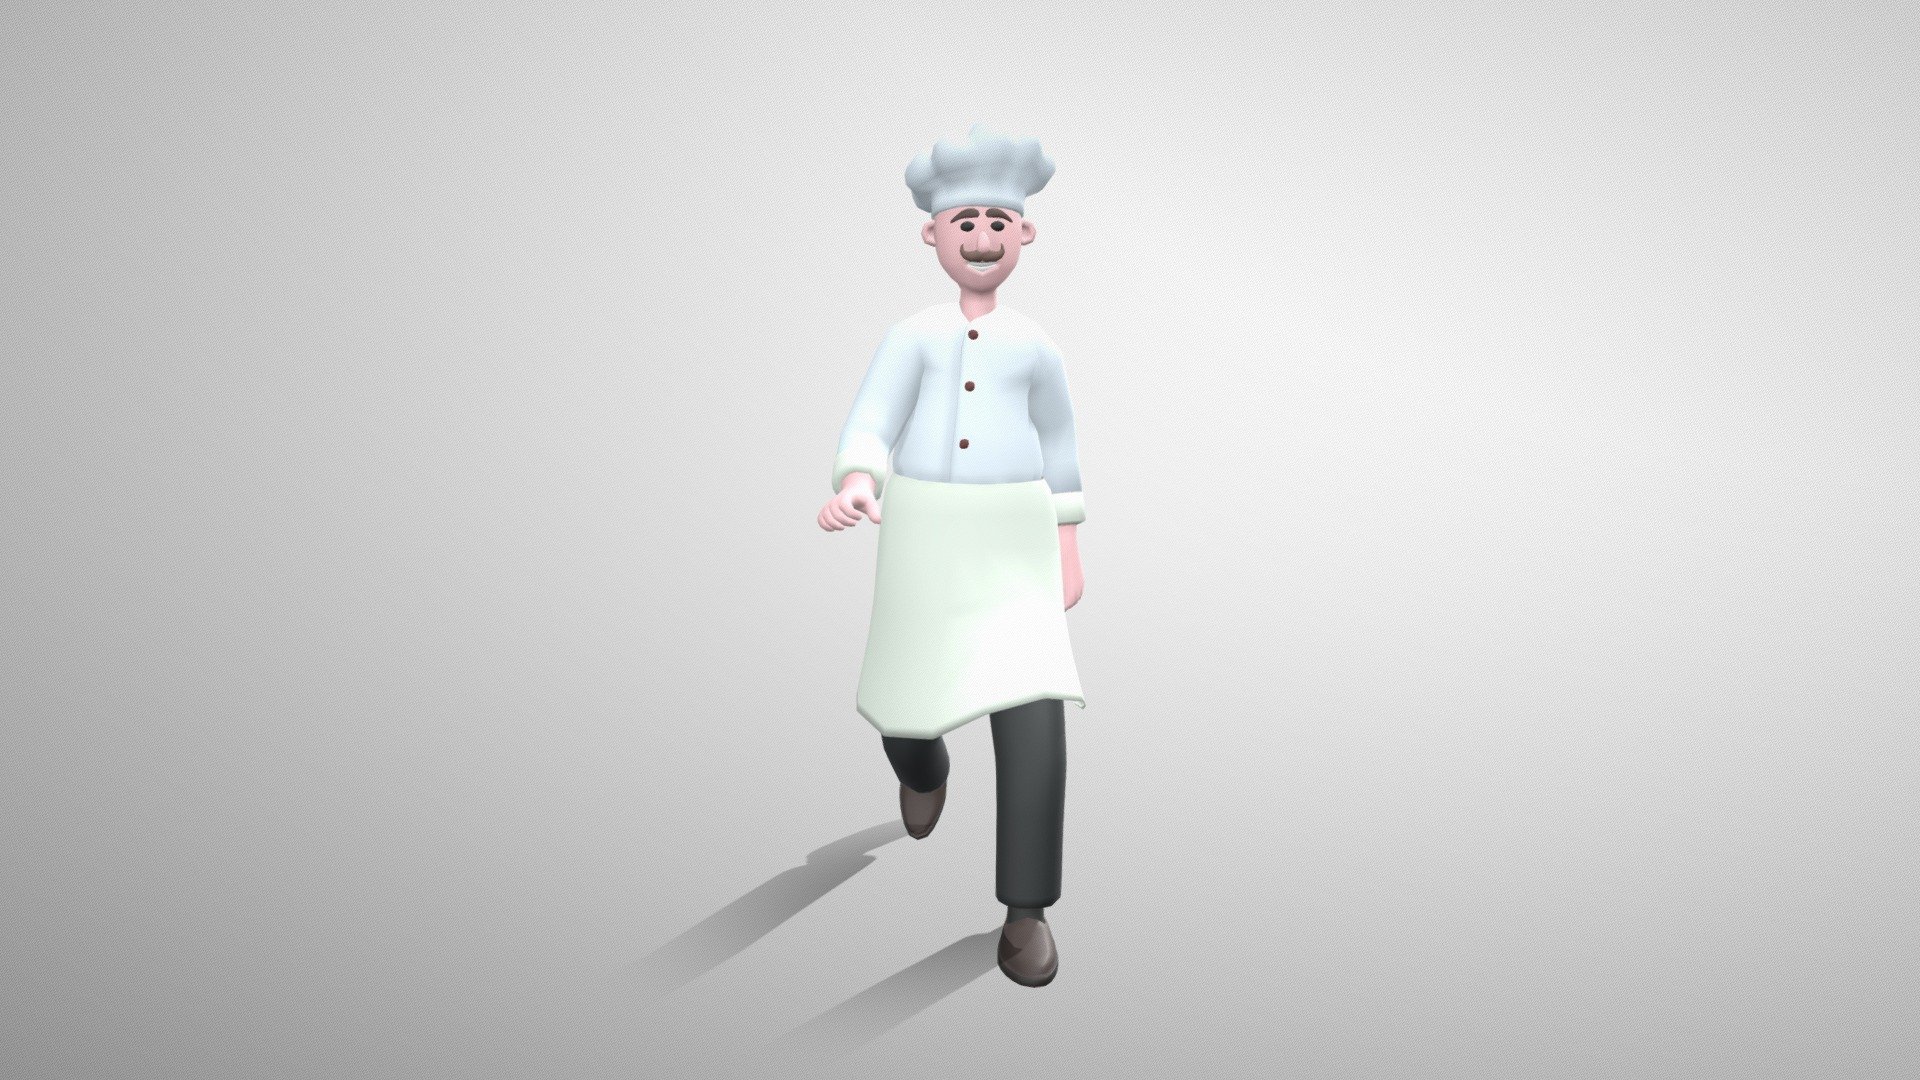 Stylized Man Cook is the part of the big characters bundle. These stylized 3D characters might be useful for motion graphics design, cartoon production, game development, illustrations and many other industries.

The 3D model is rigged and ready to use with Mixamo. You can apply any Mixamo animation in one click . We also added 12 widely used animations.

The character model is well optimized and subdivision ready. You can choose any smoothing option you want, according to your project.

The model has only a single texture. It is useful for mobile game development and it's easy to change colors of clothes, skin etc.

If you have any questions or suggestions on improving our product, feel free to send a message to mail@dreamlab.net.ua - Stylized Man Cook - Mixamo Rigged Character - Buy Royalty Free 3D model by Dream Lab (@dreamlabanim) 3d model